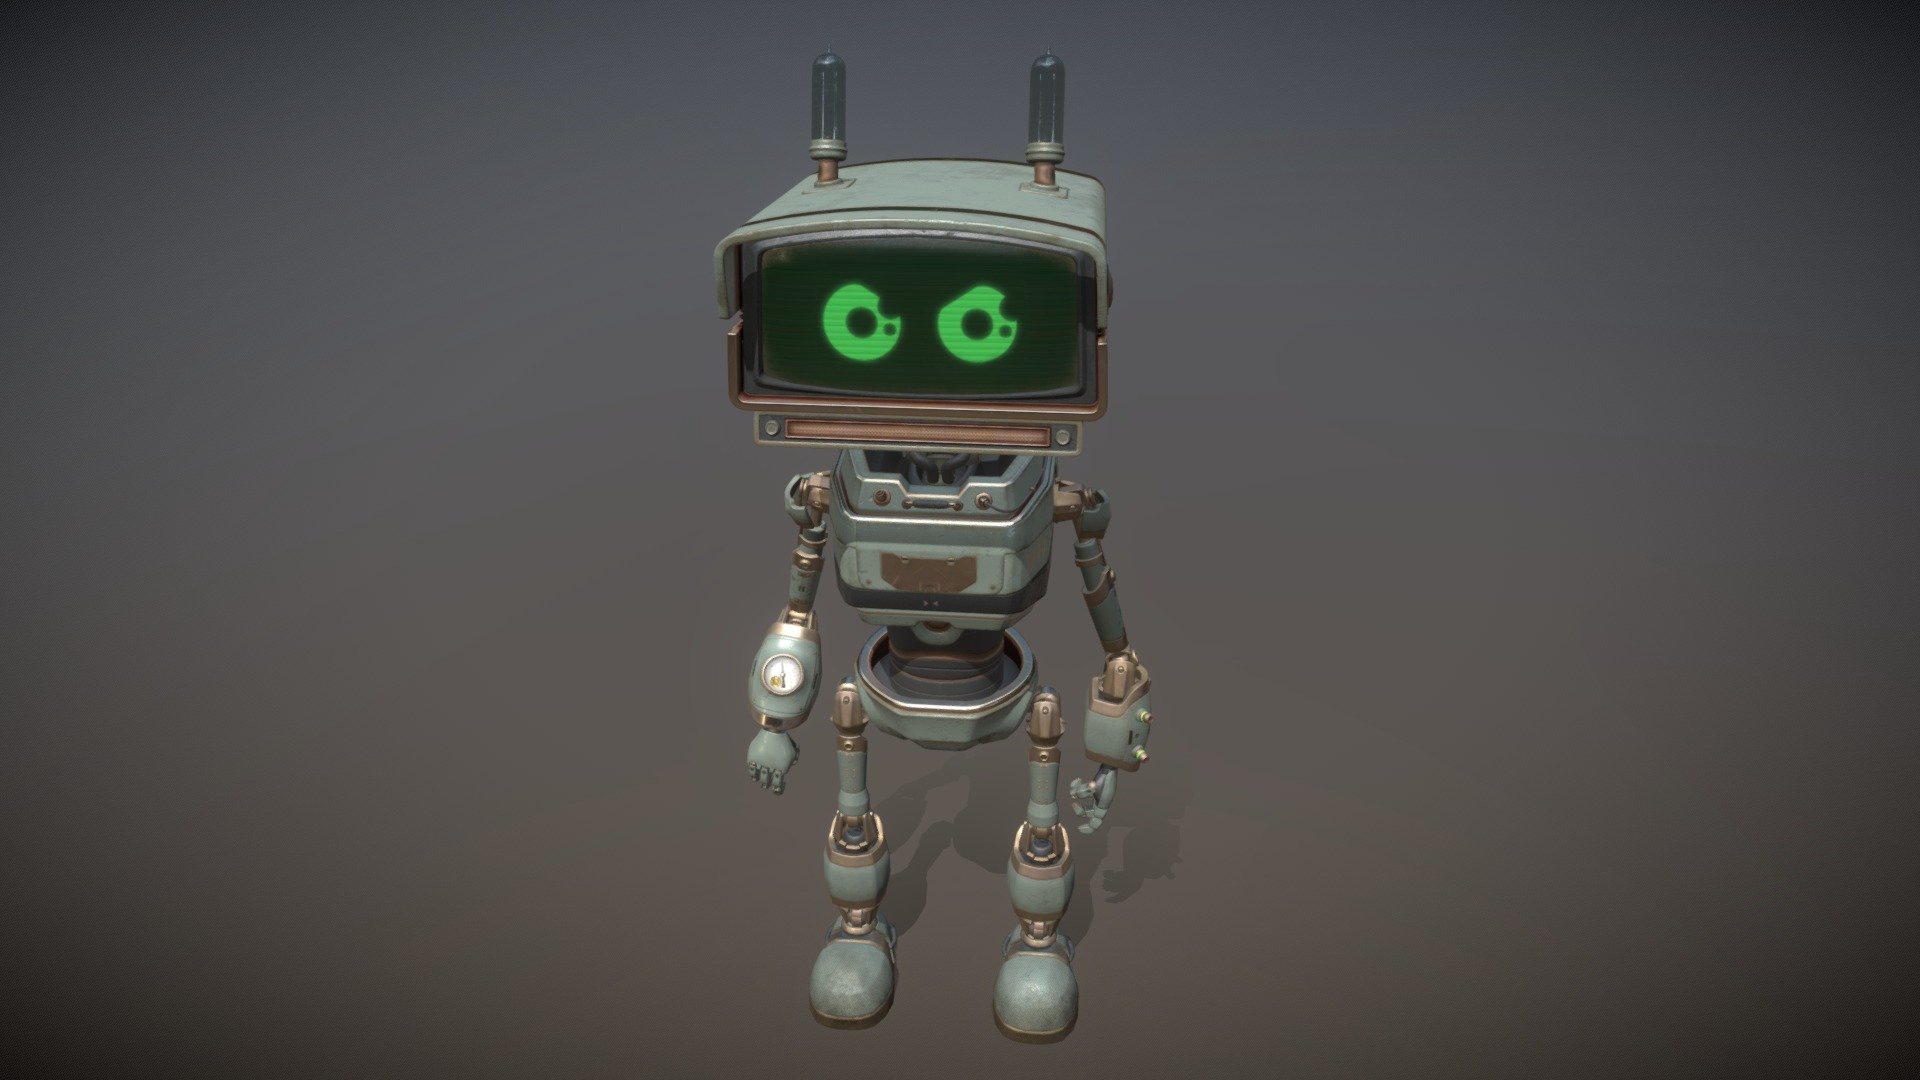 An old Soviet robot scout. Forgotten, but working&hellip;

This is my first game ready model of a game character. Rig still needs to be finalized, I'm learning about it.
I hope you like it and find where to use it.

Enjoy! - Old scout Soviet bot "E-walking-44" - Download Free 3D model by Groccel 3d model